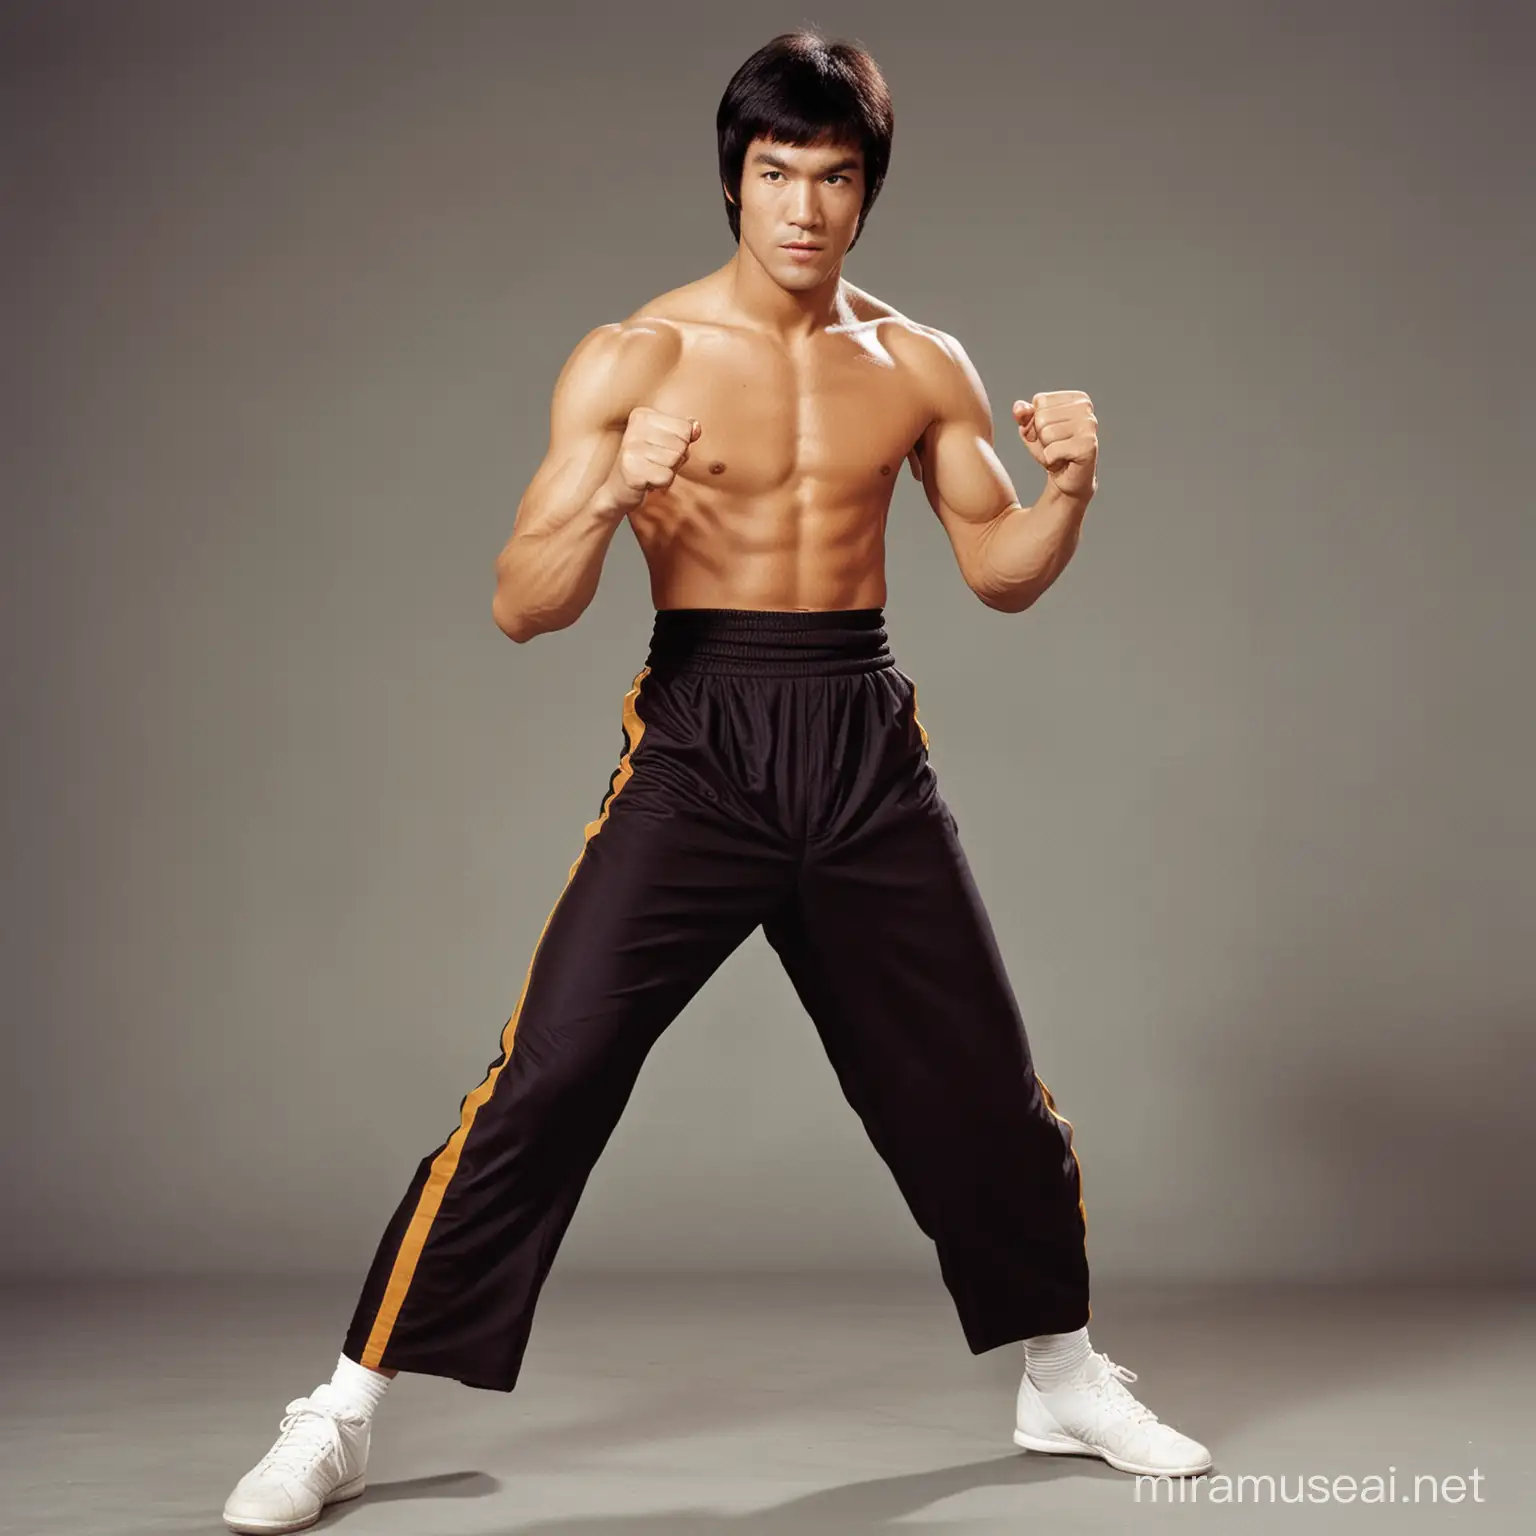 Bruce Lee in Action Iconic Martial Artist Demonstrating Jeet Kune Do Techniques